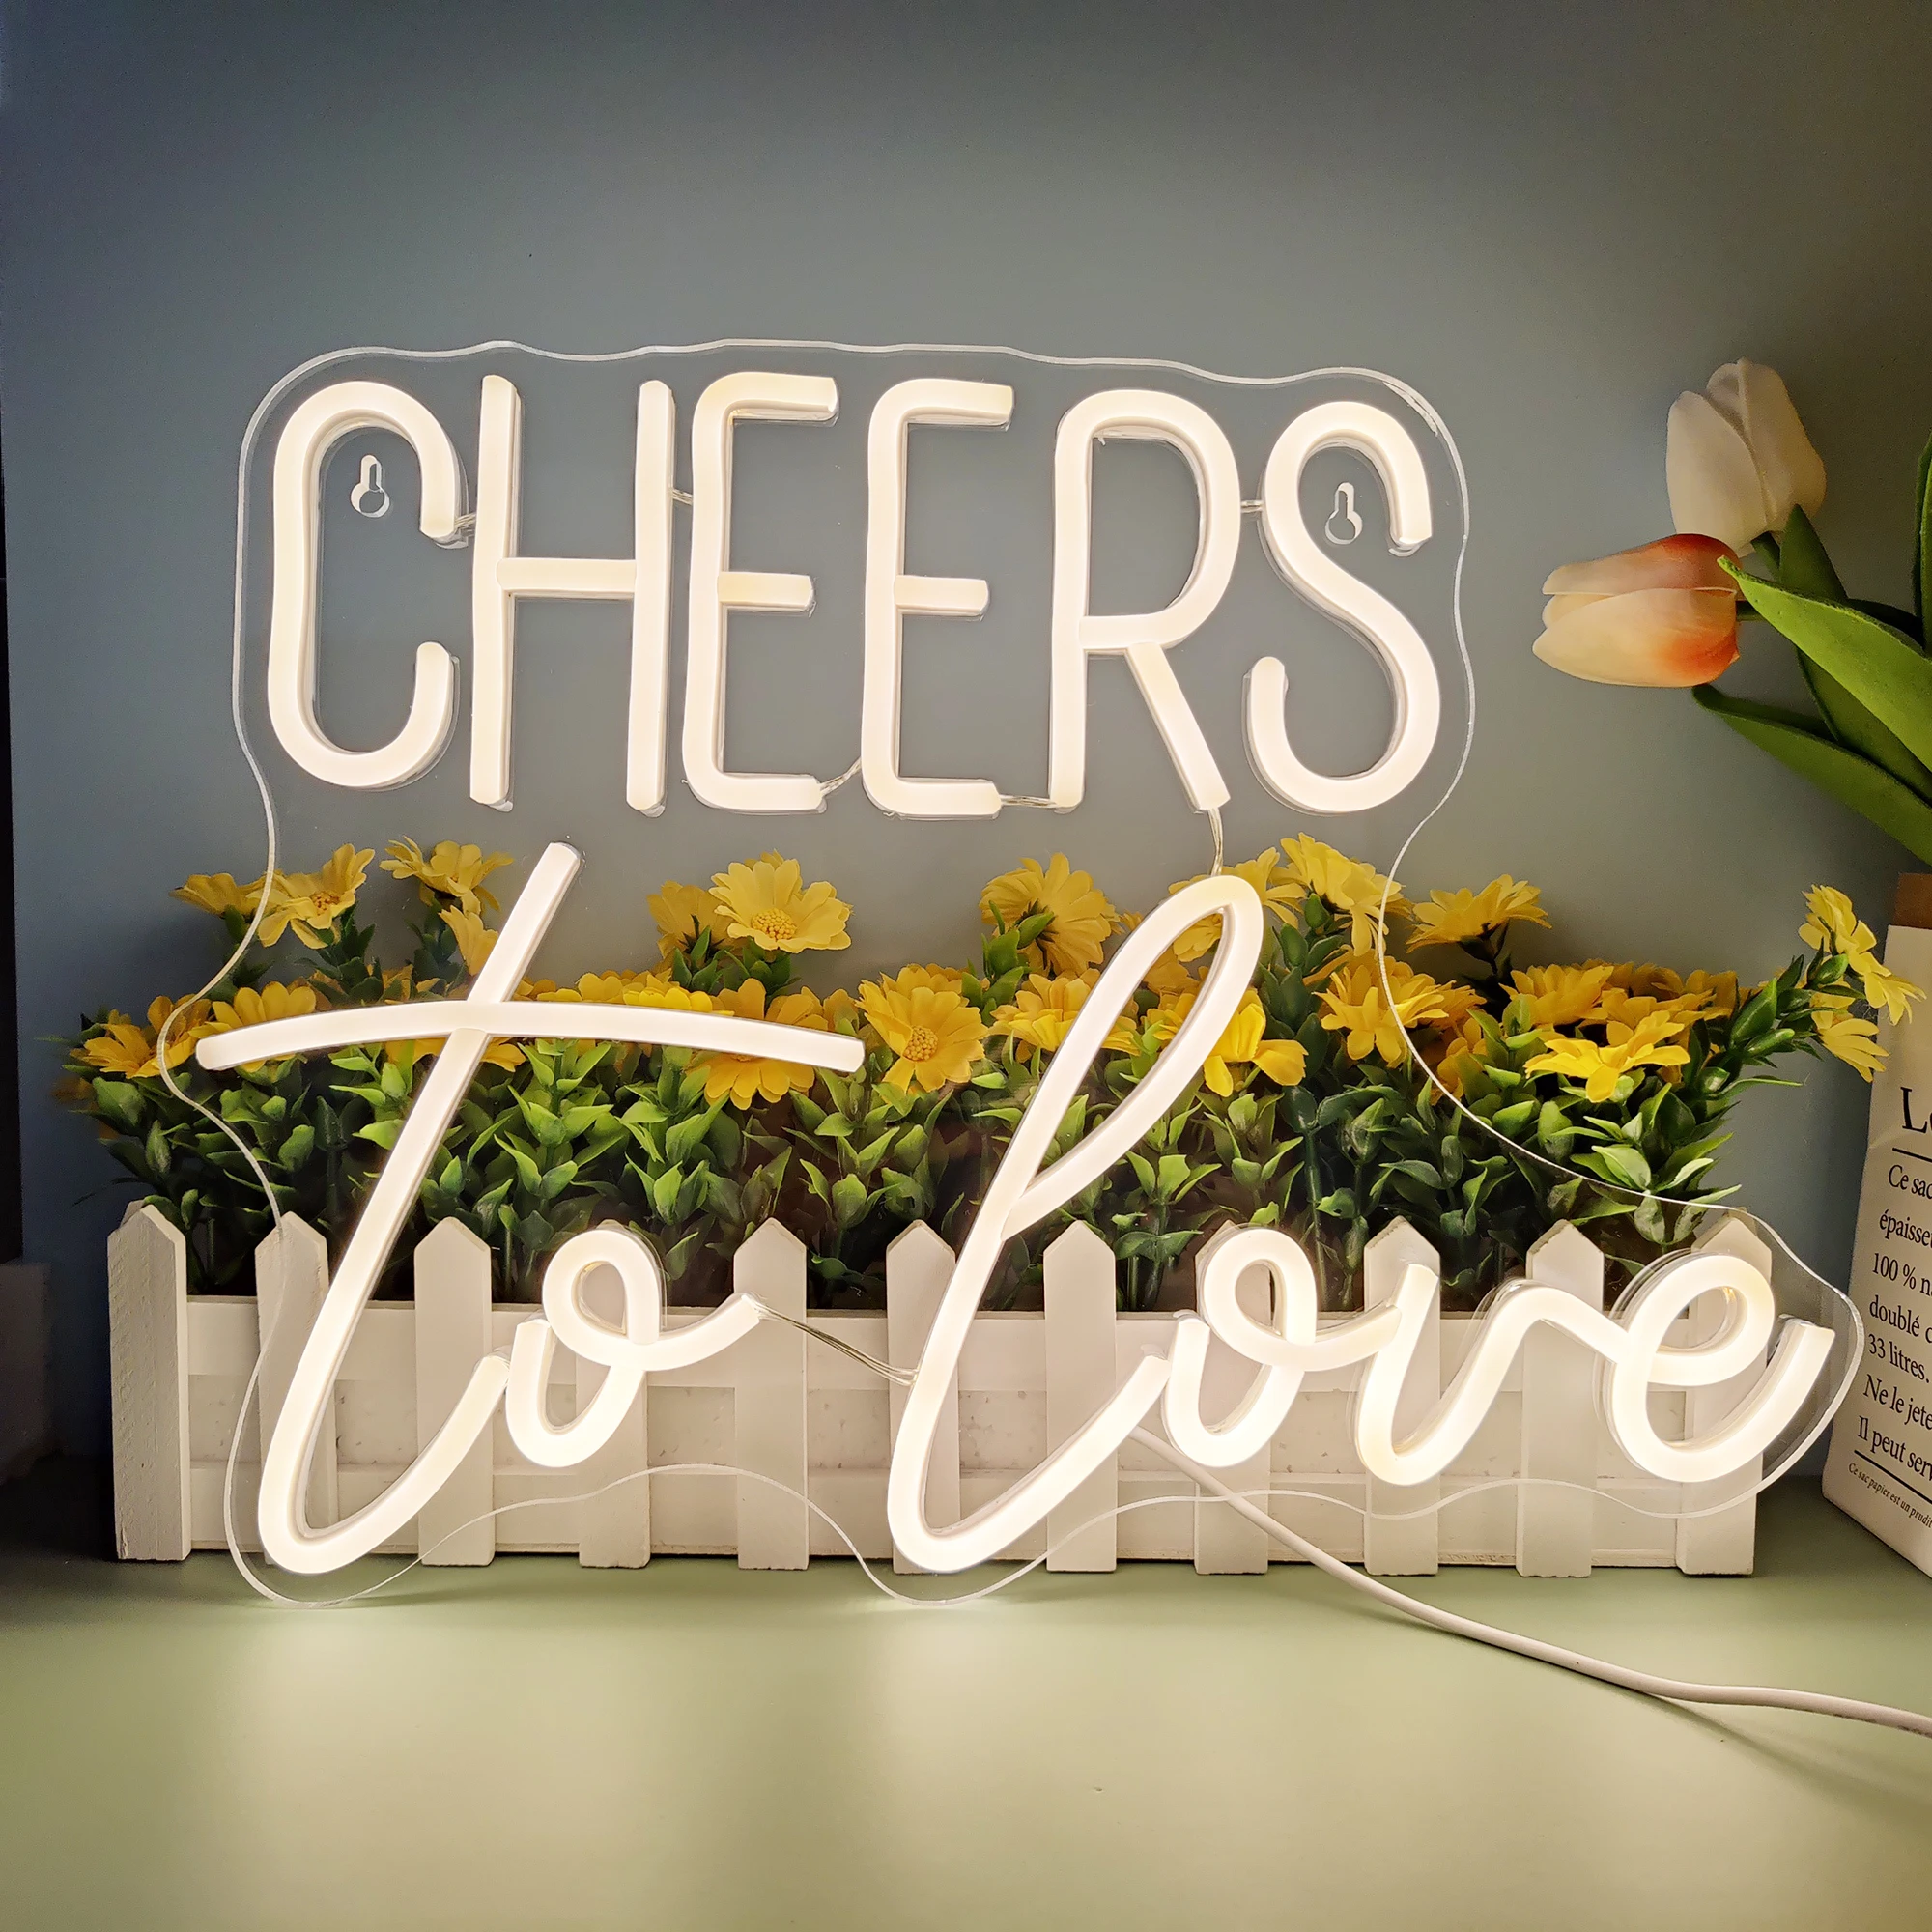 

CHEERS To Love Neon Sign Wedding Party LED Light Wall Decor Home Bedroom Shop Decoration Creative Marriage Neons Gift